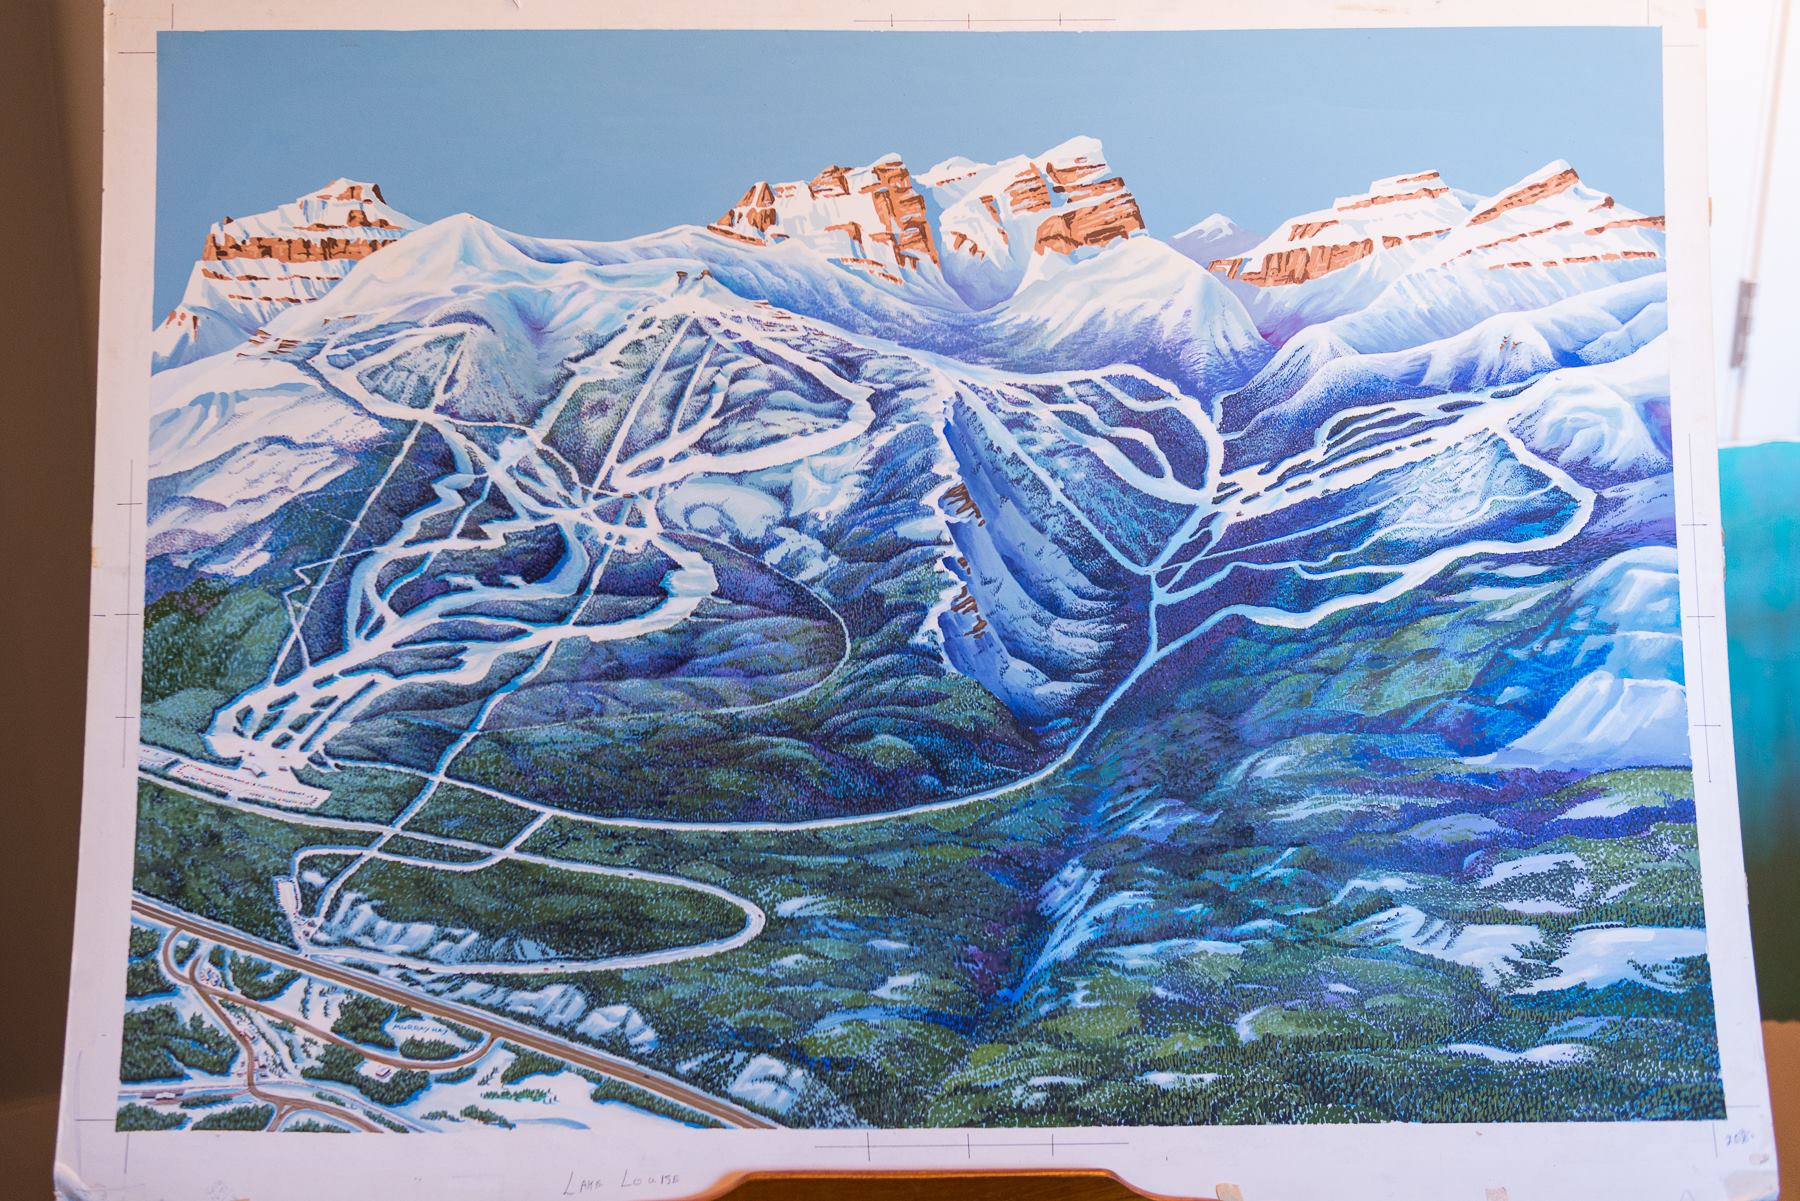 This was the first ski area that Murray Hay painted.